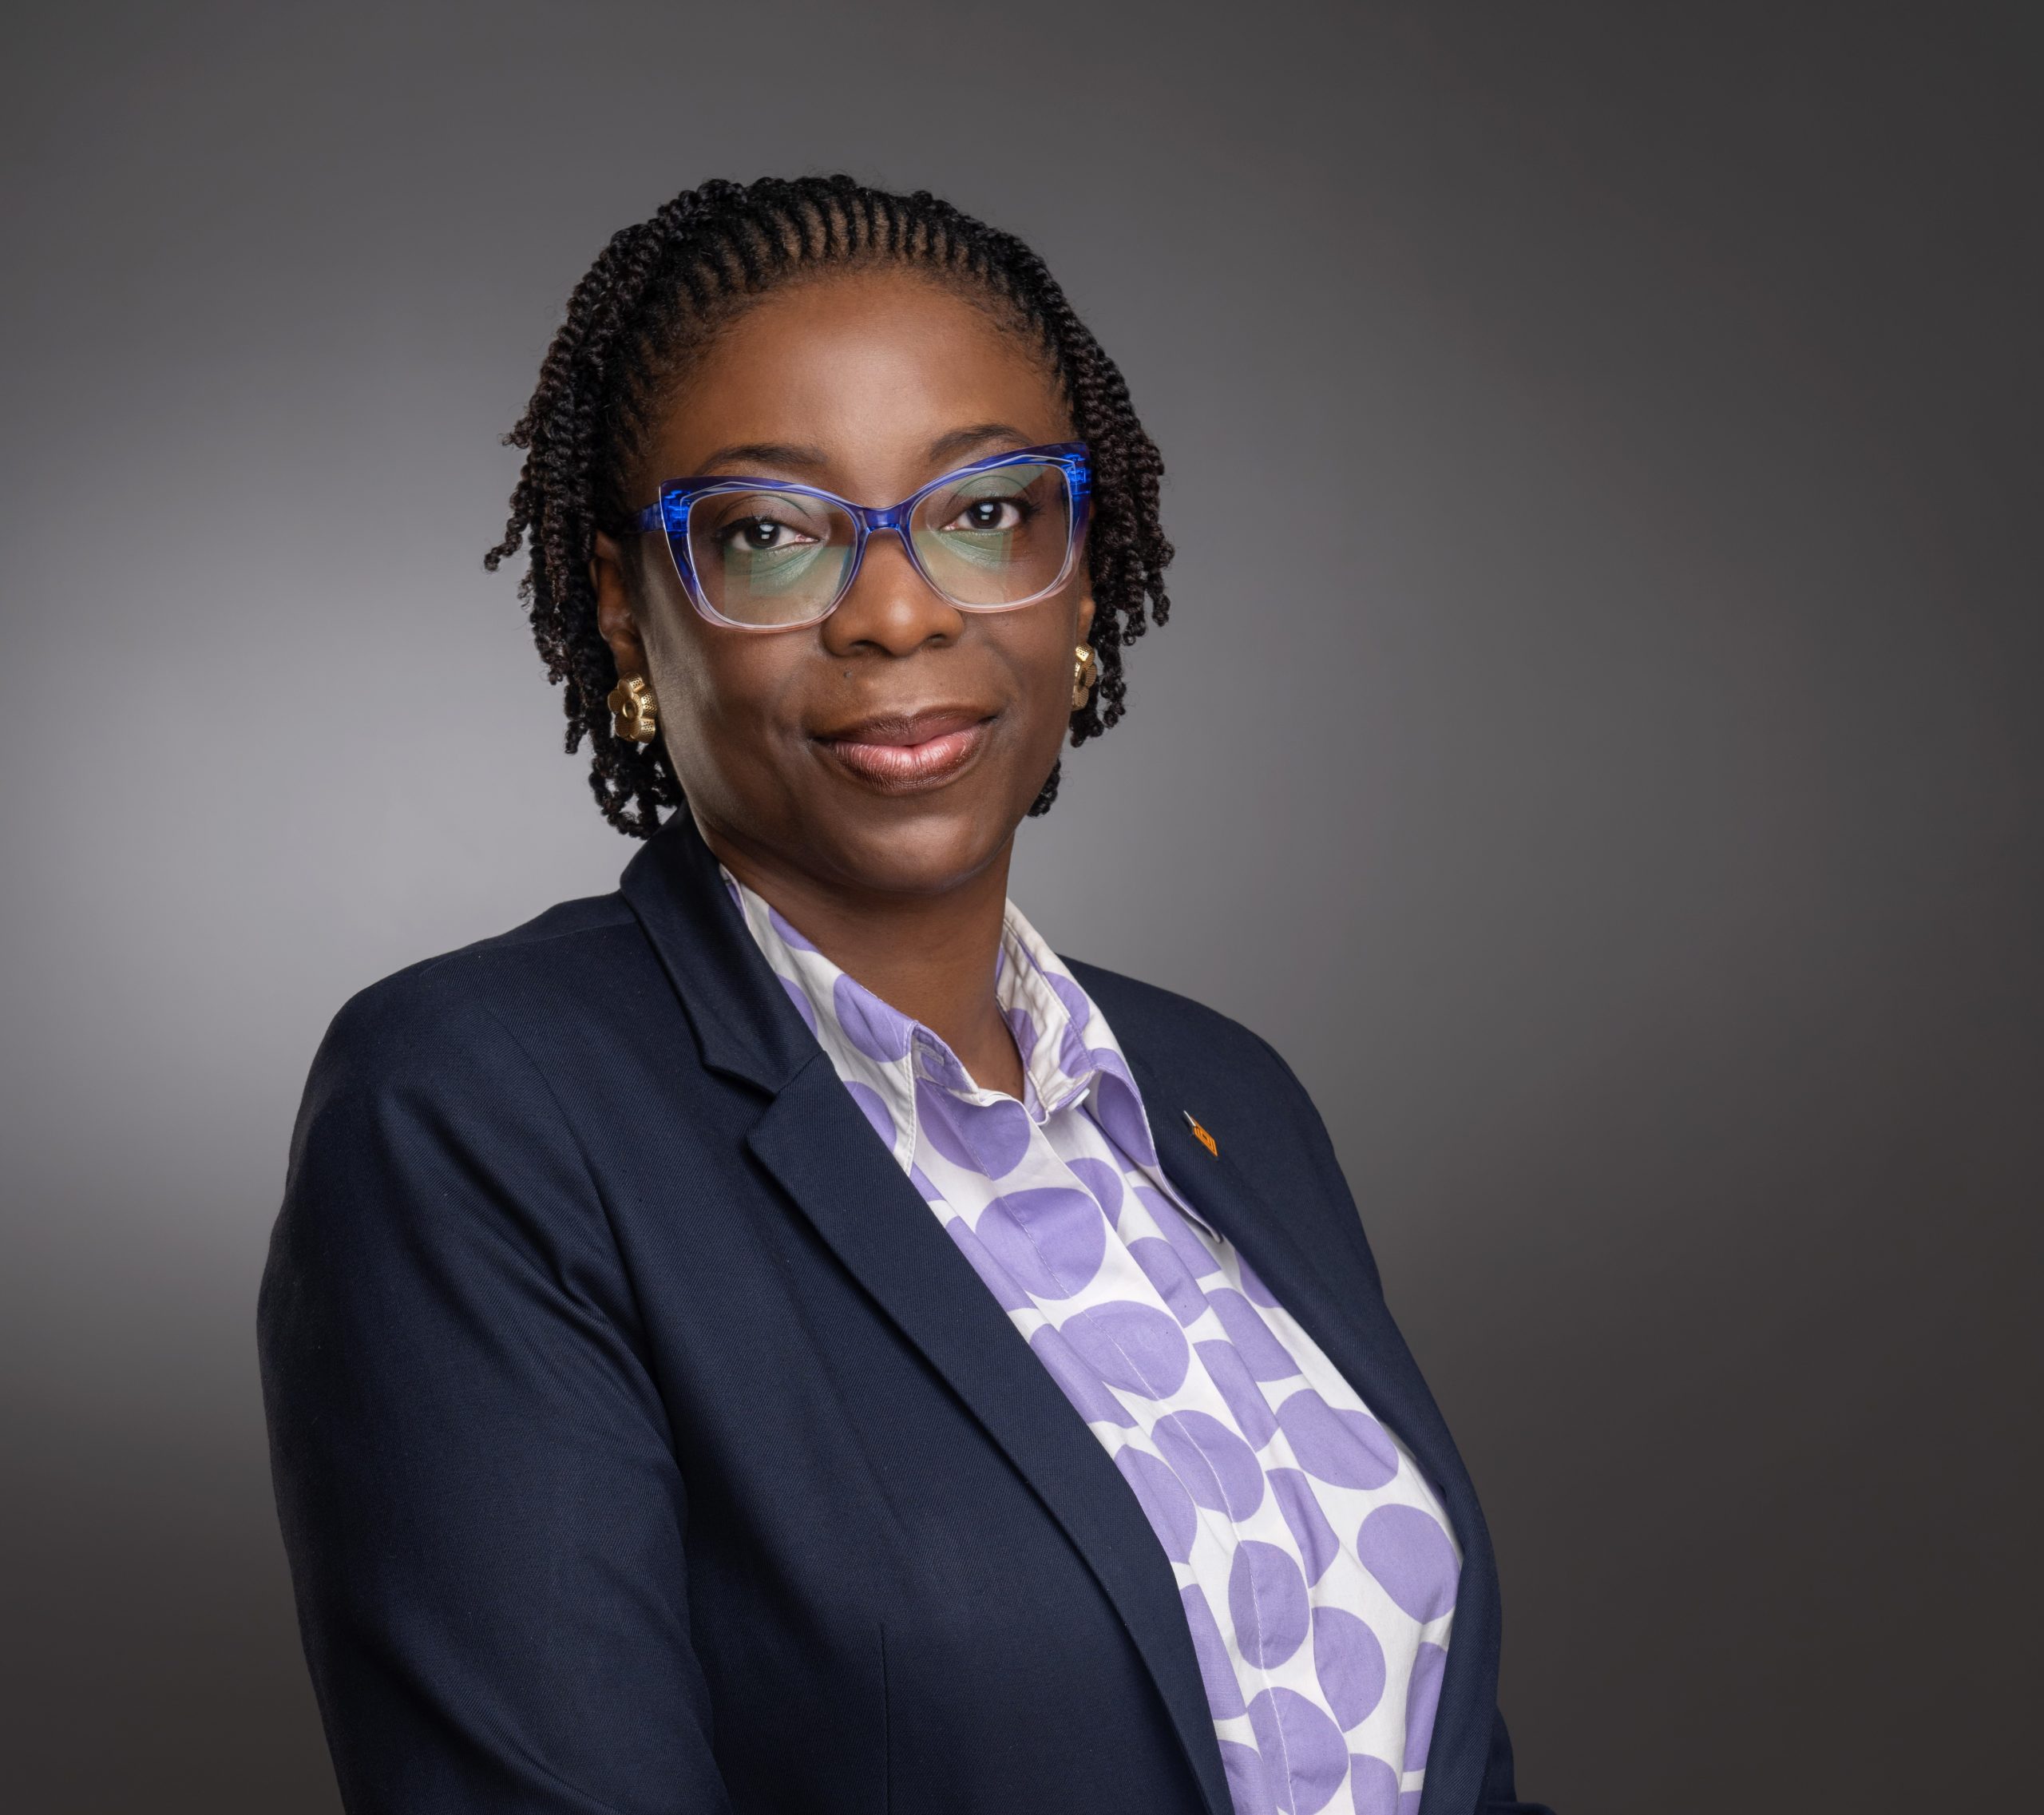 ACCESS HOLDINGS PLC ANNOUNCES THE APPOINTMENT OF MS. BOLAJI AGBEDE AS ACTING GROUP CHIEF EXECUTIVE OFFICER